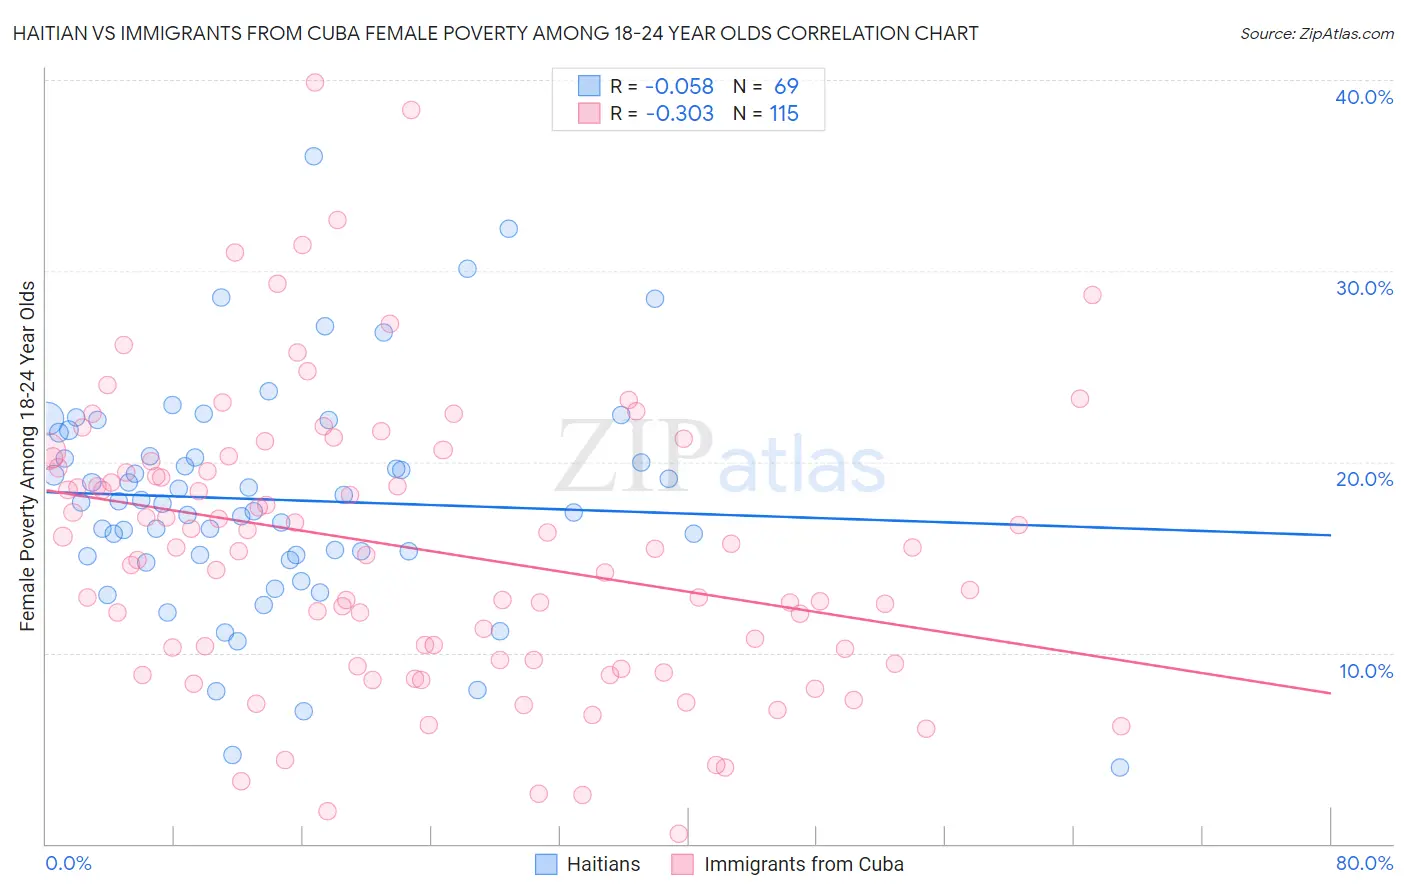 Haitian vs Immigrants from Cuba Female Poverty Among 18-24 Year Olds